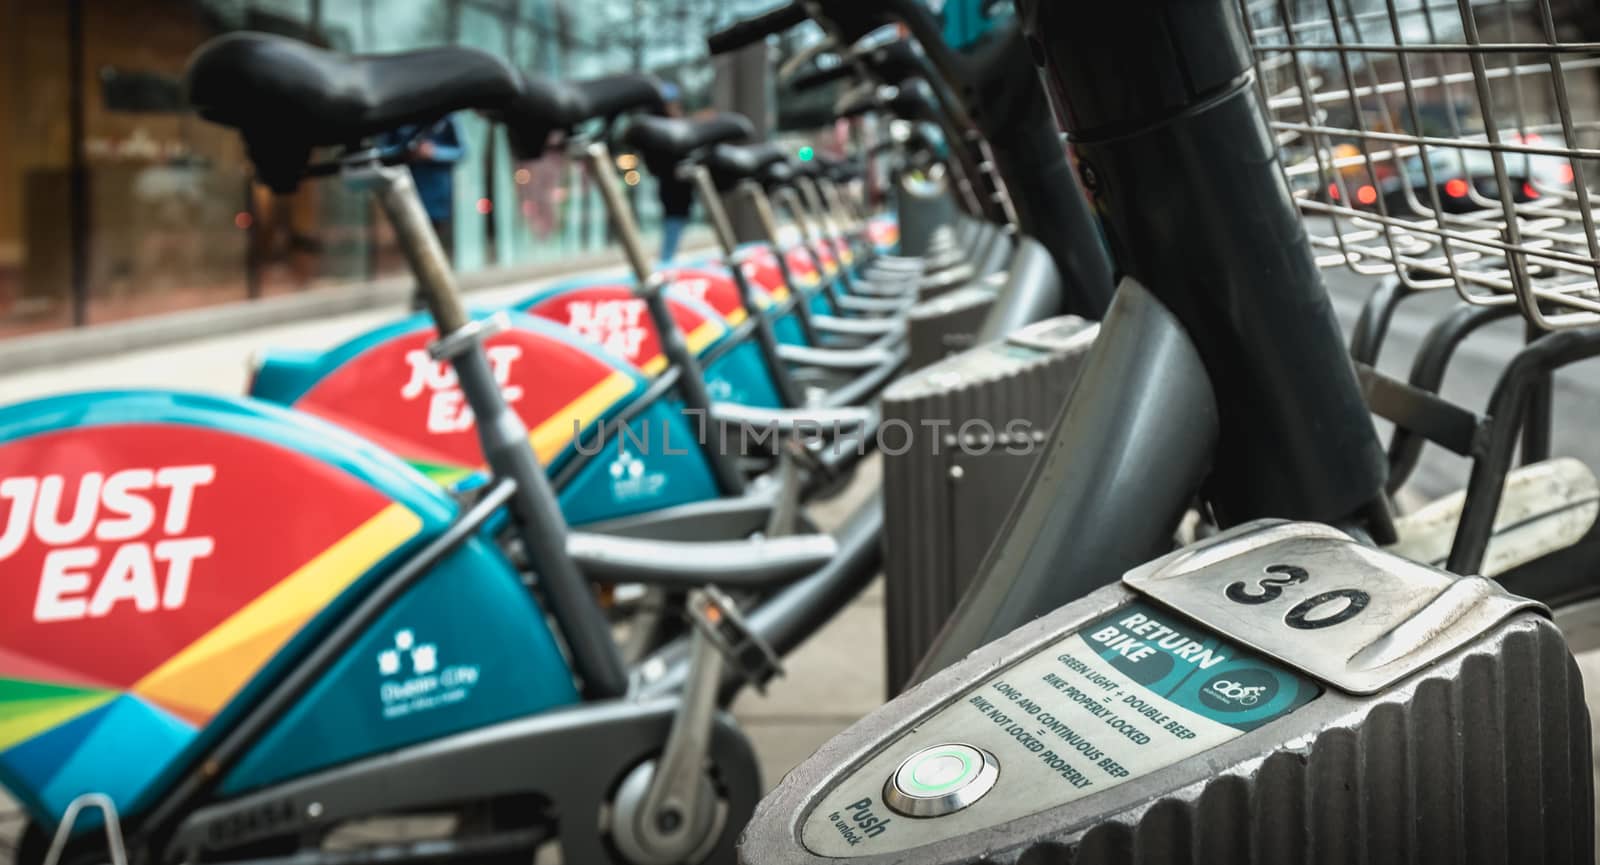  Detail of a shared public bike station Just Eat dublinbikes in  by AtlanticEUROSTOXX